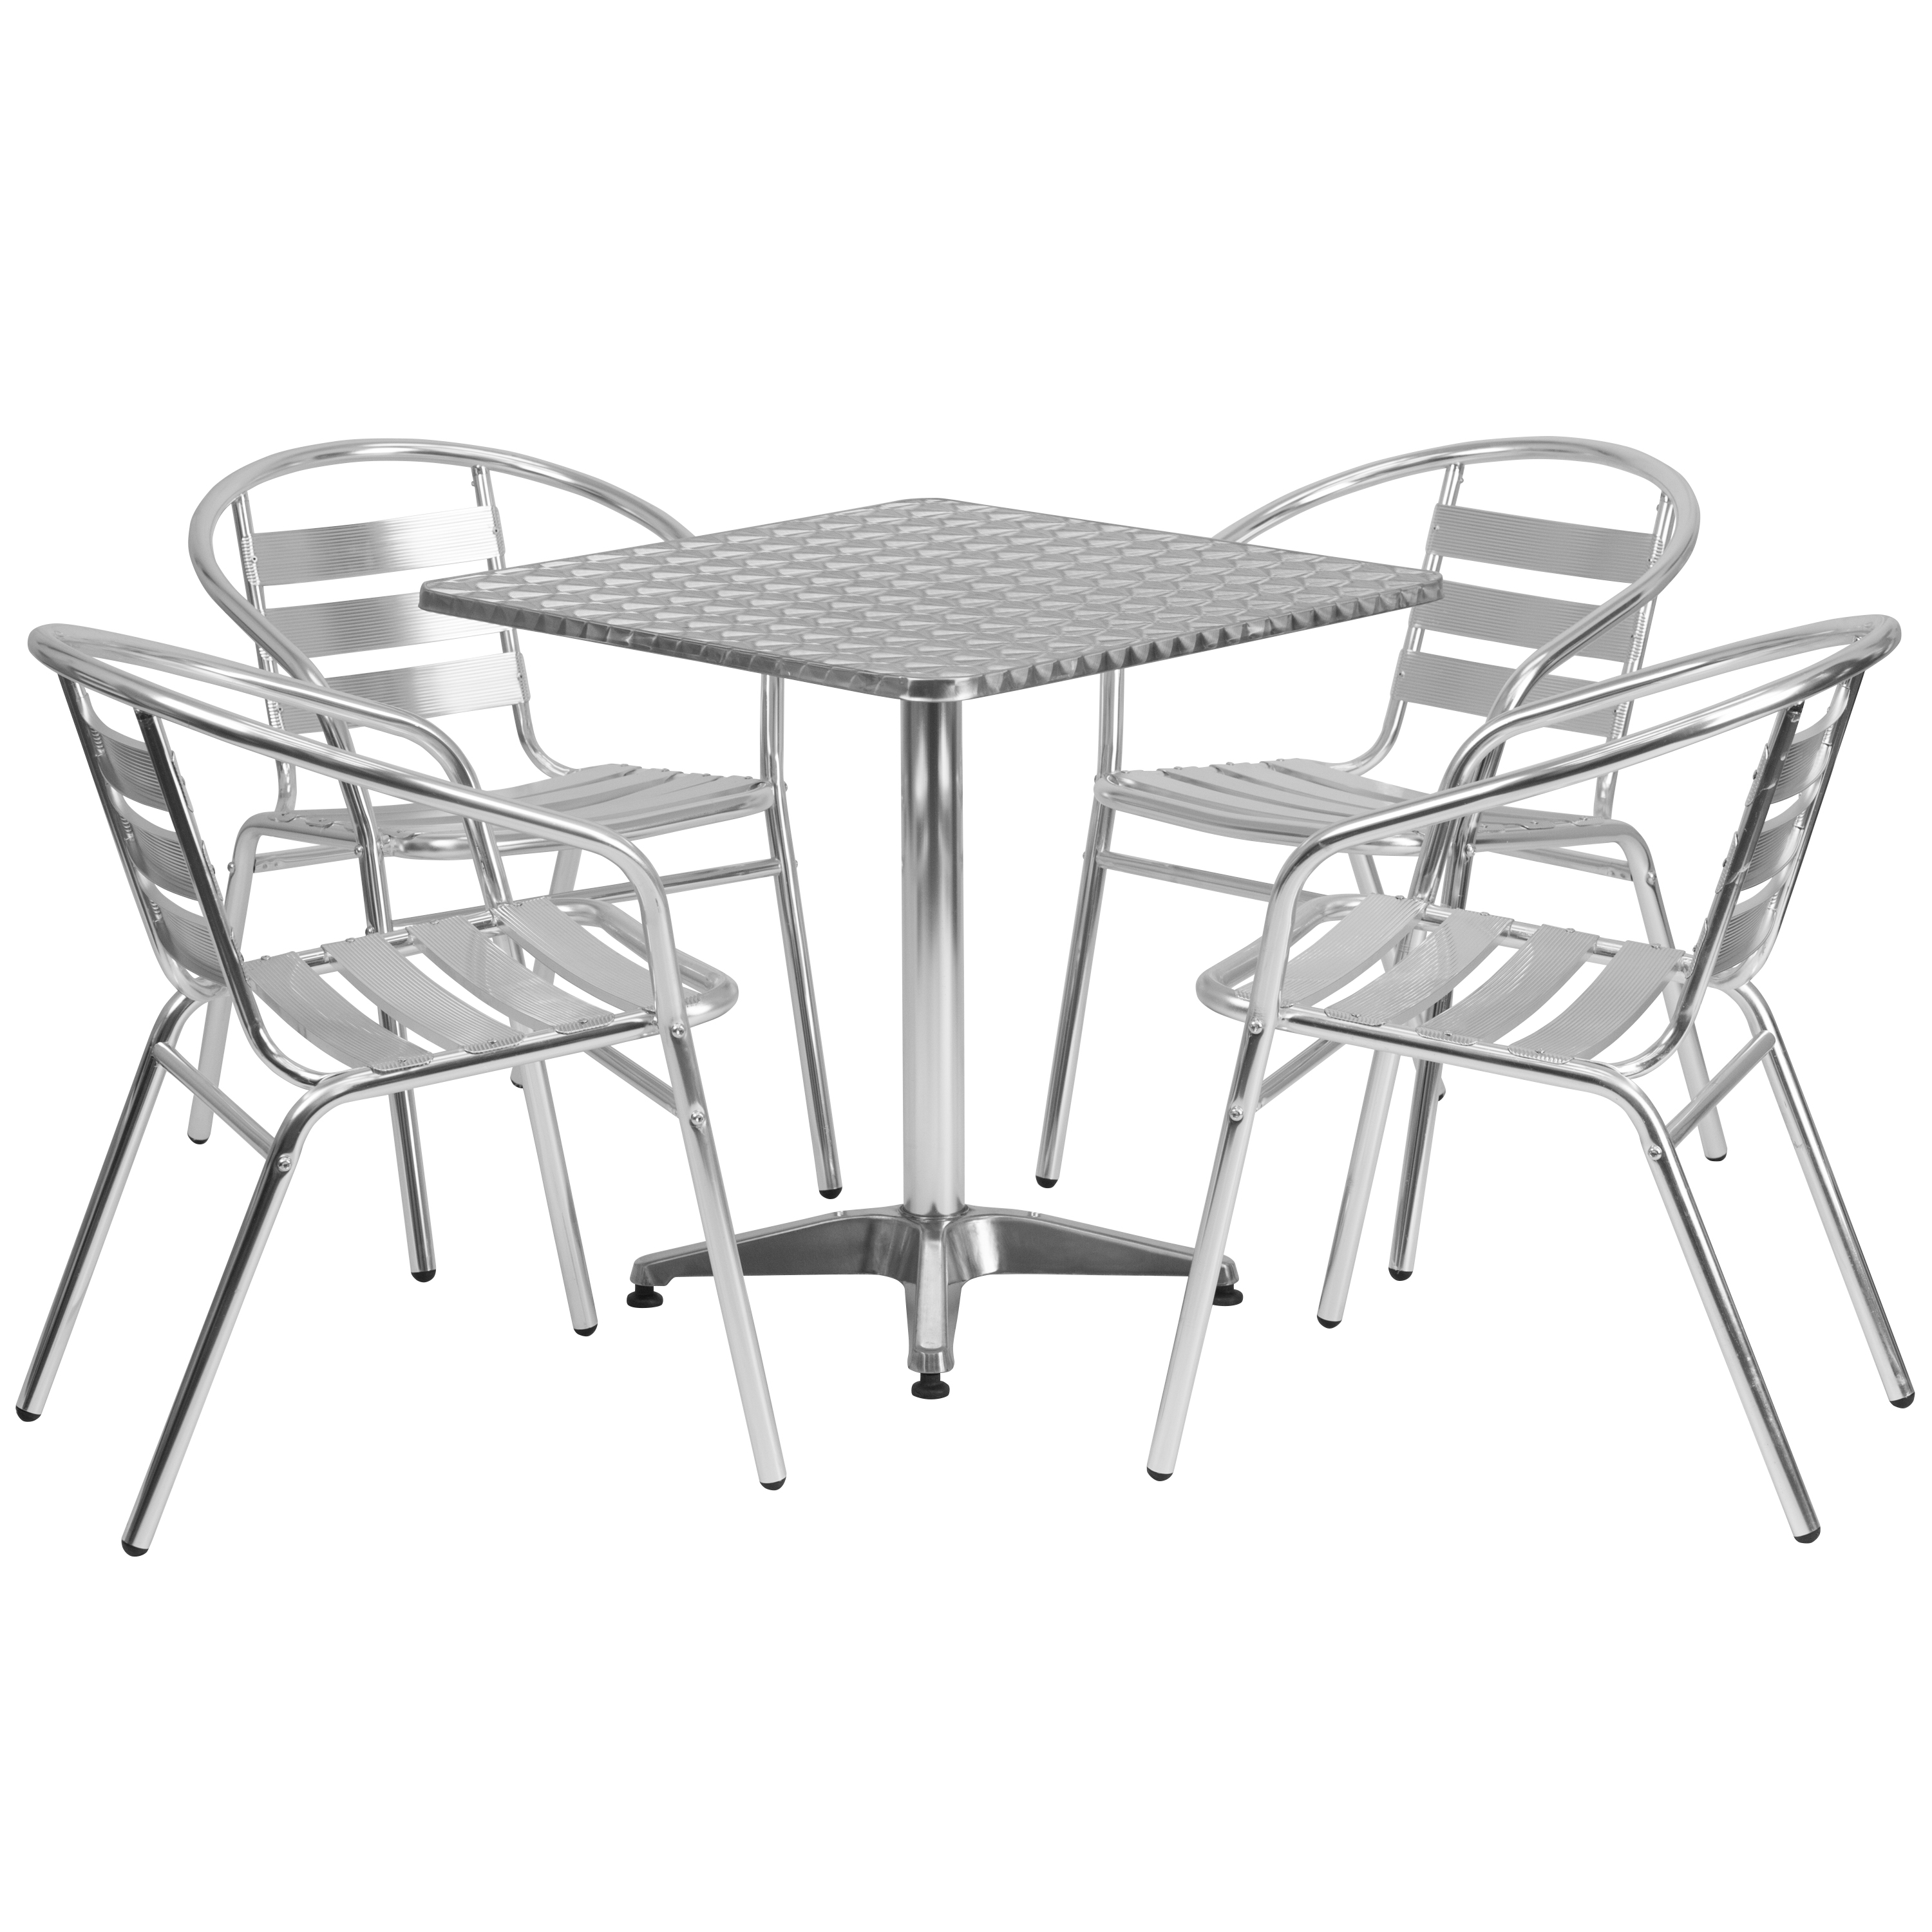 Flash Furniture TLH-ALUM-28SQ-017BCHR4-GG Indoor/Outdoor 27.5'' Square Aluminum Table with 4 Slat Back Chairs, 5 Piece Set